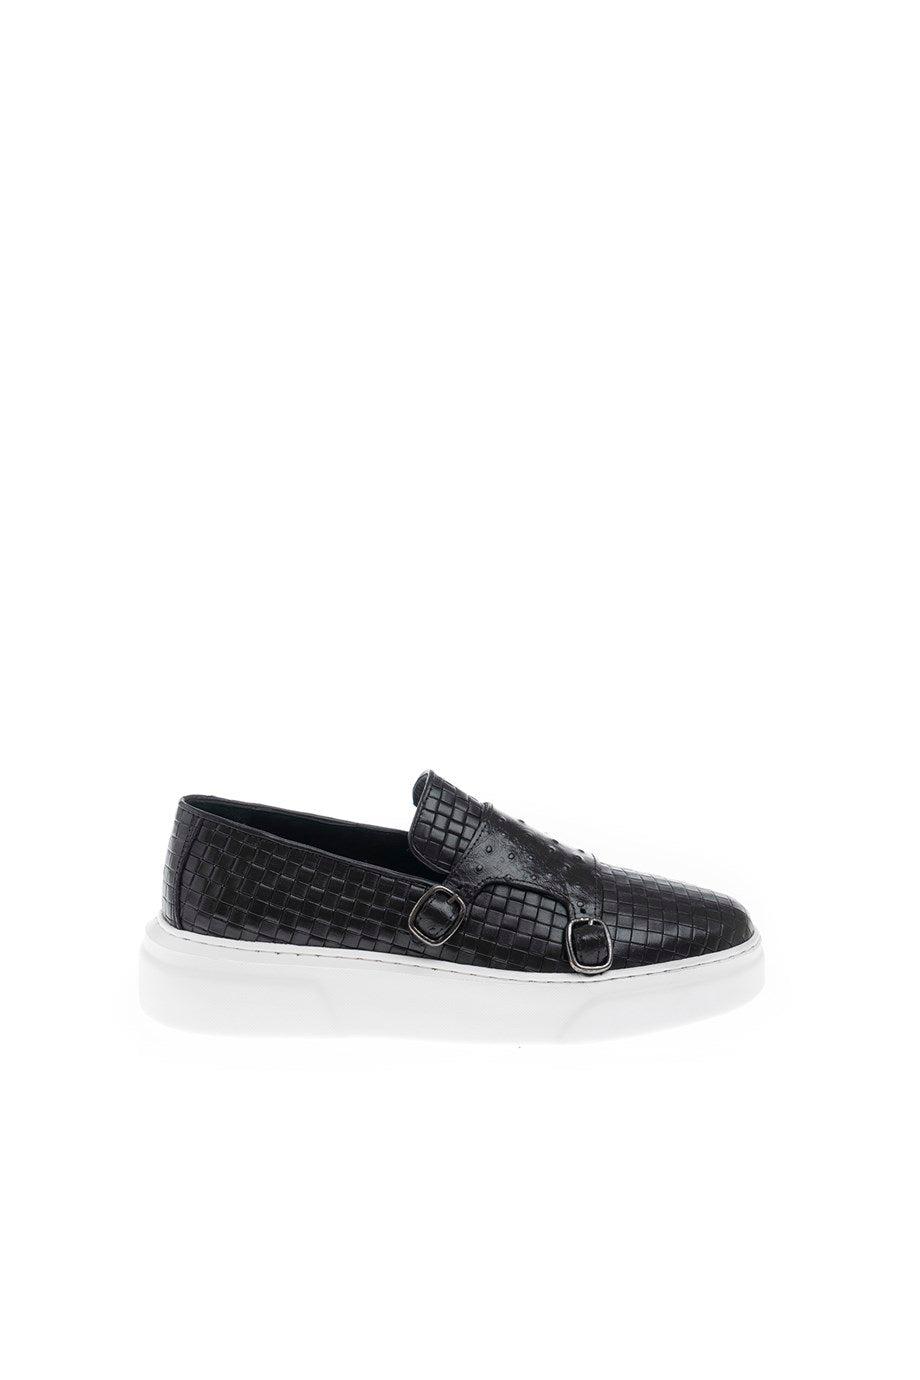 Mesh Eva Sole Genuine Leather Casual - MENSTYLEWITH